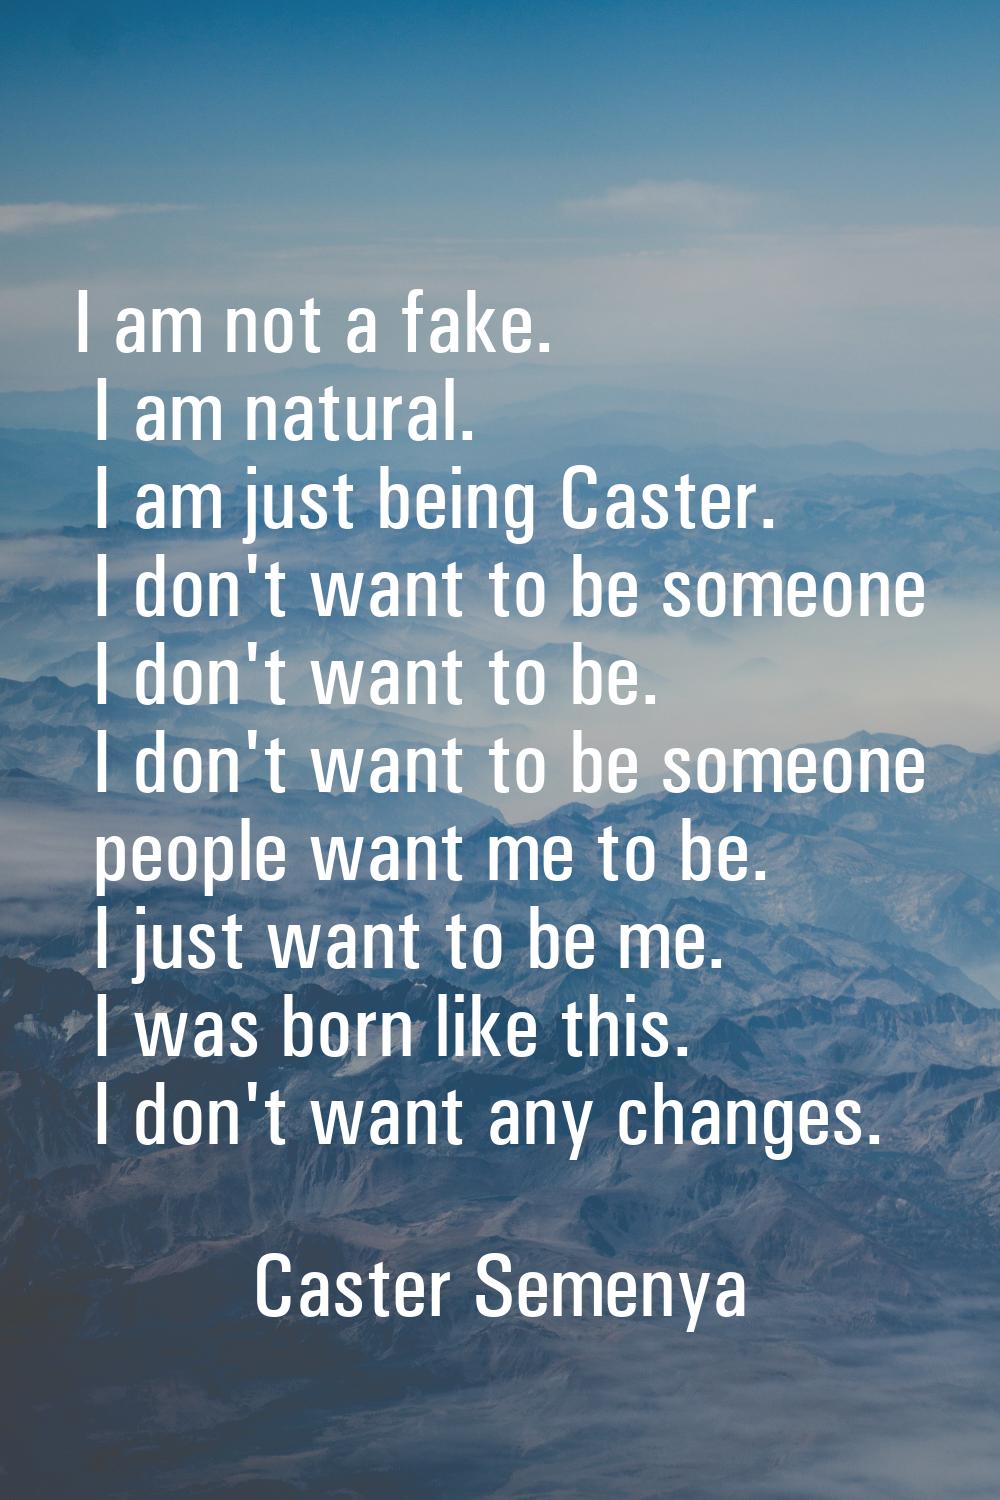 I am not a fake. I am natural. I am just being Caster. I don't want to be someone I don't want to b